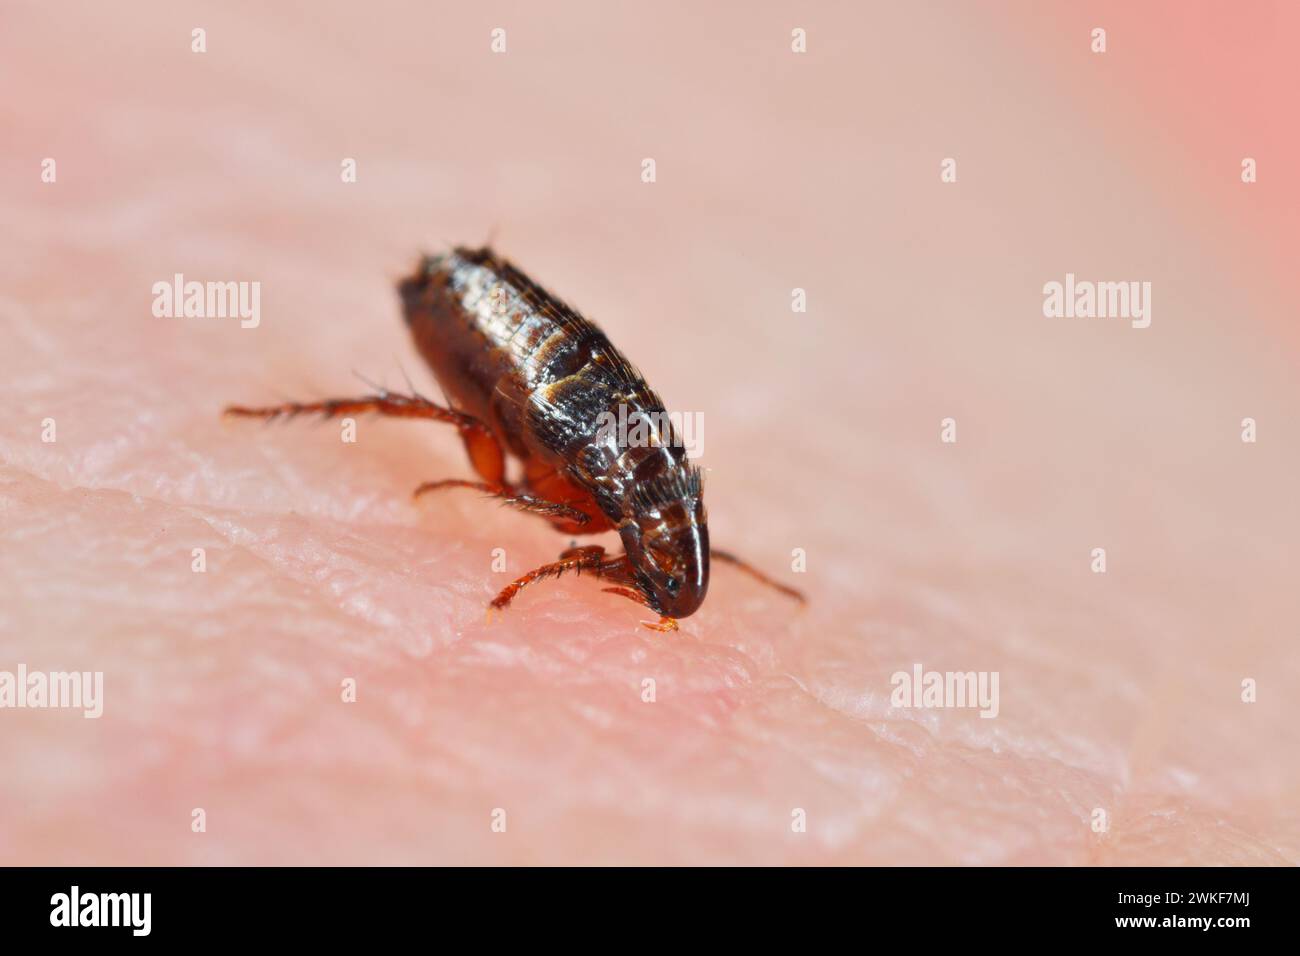 Flea. Insect biting and drinking blood on human skin. Stock Photo